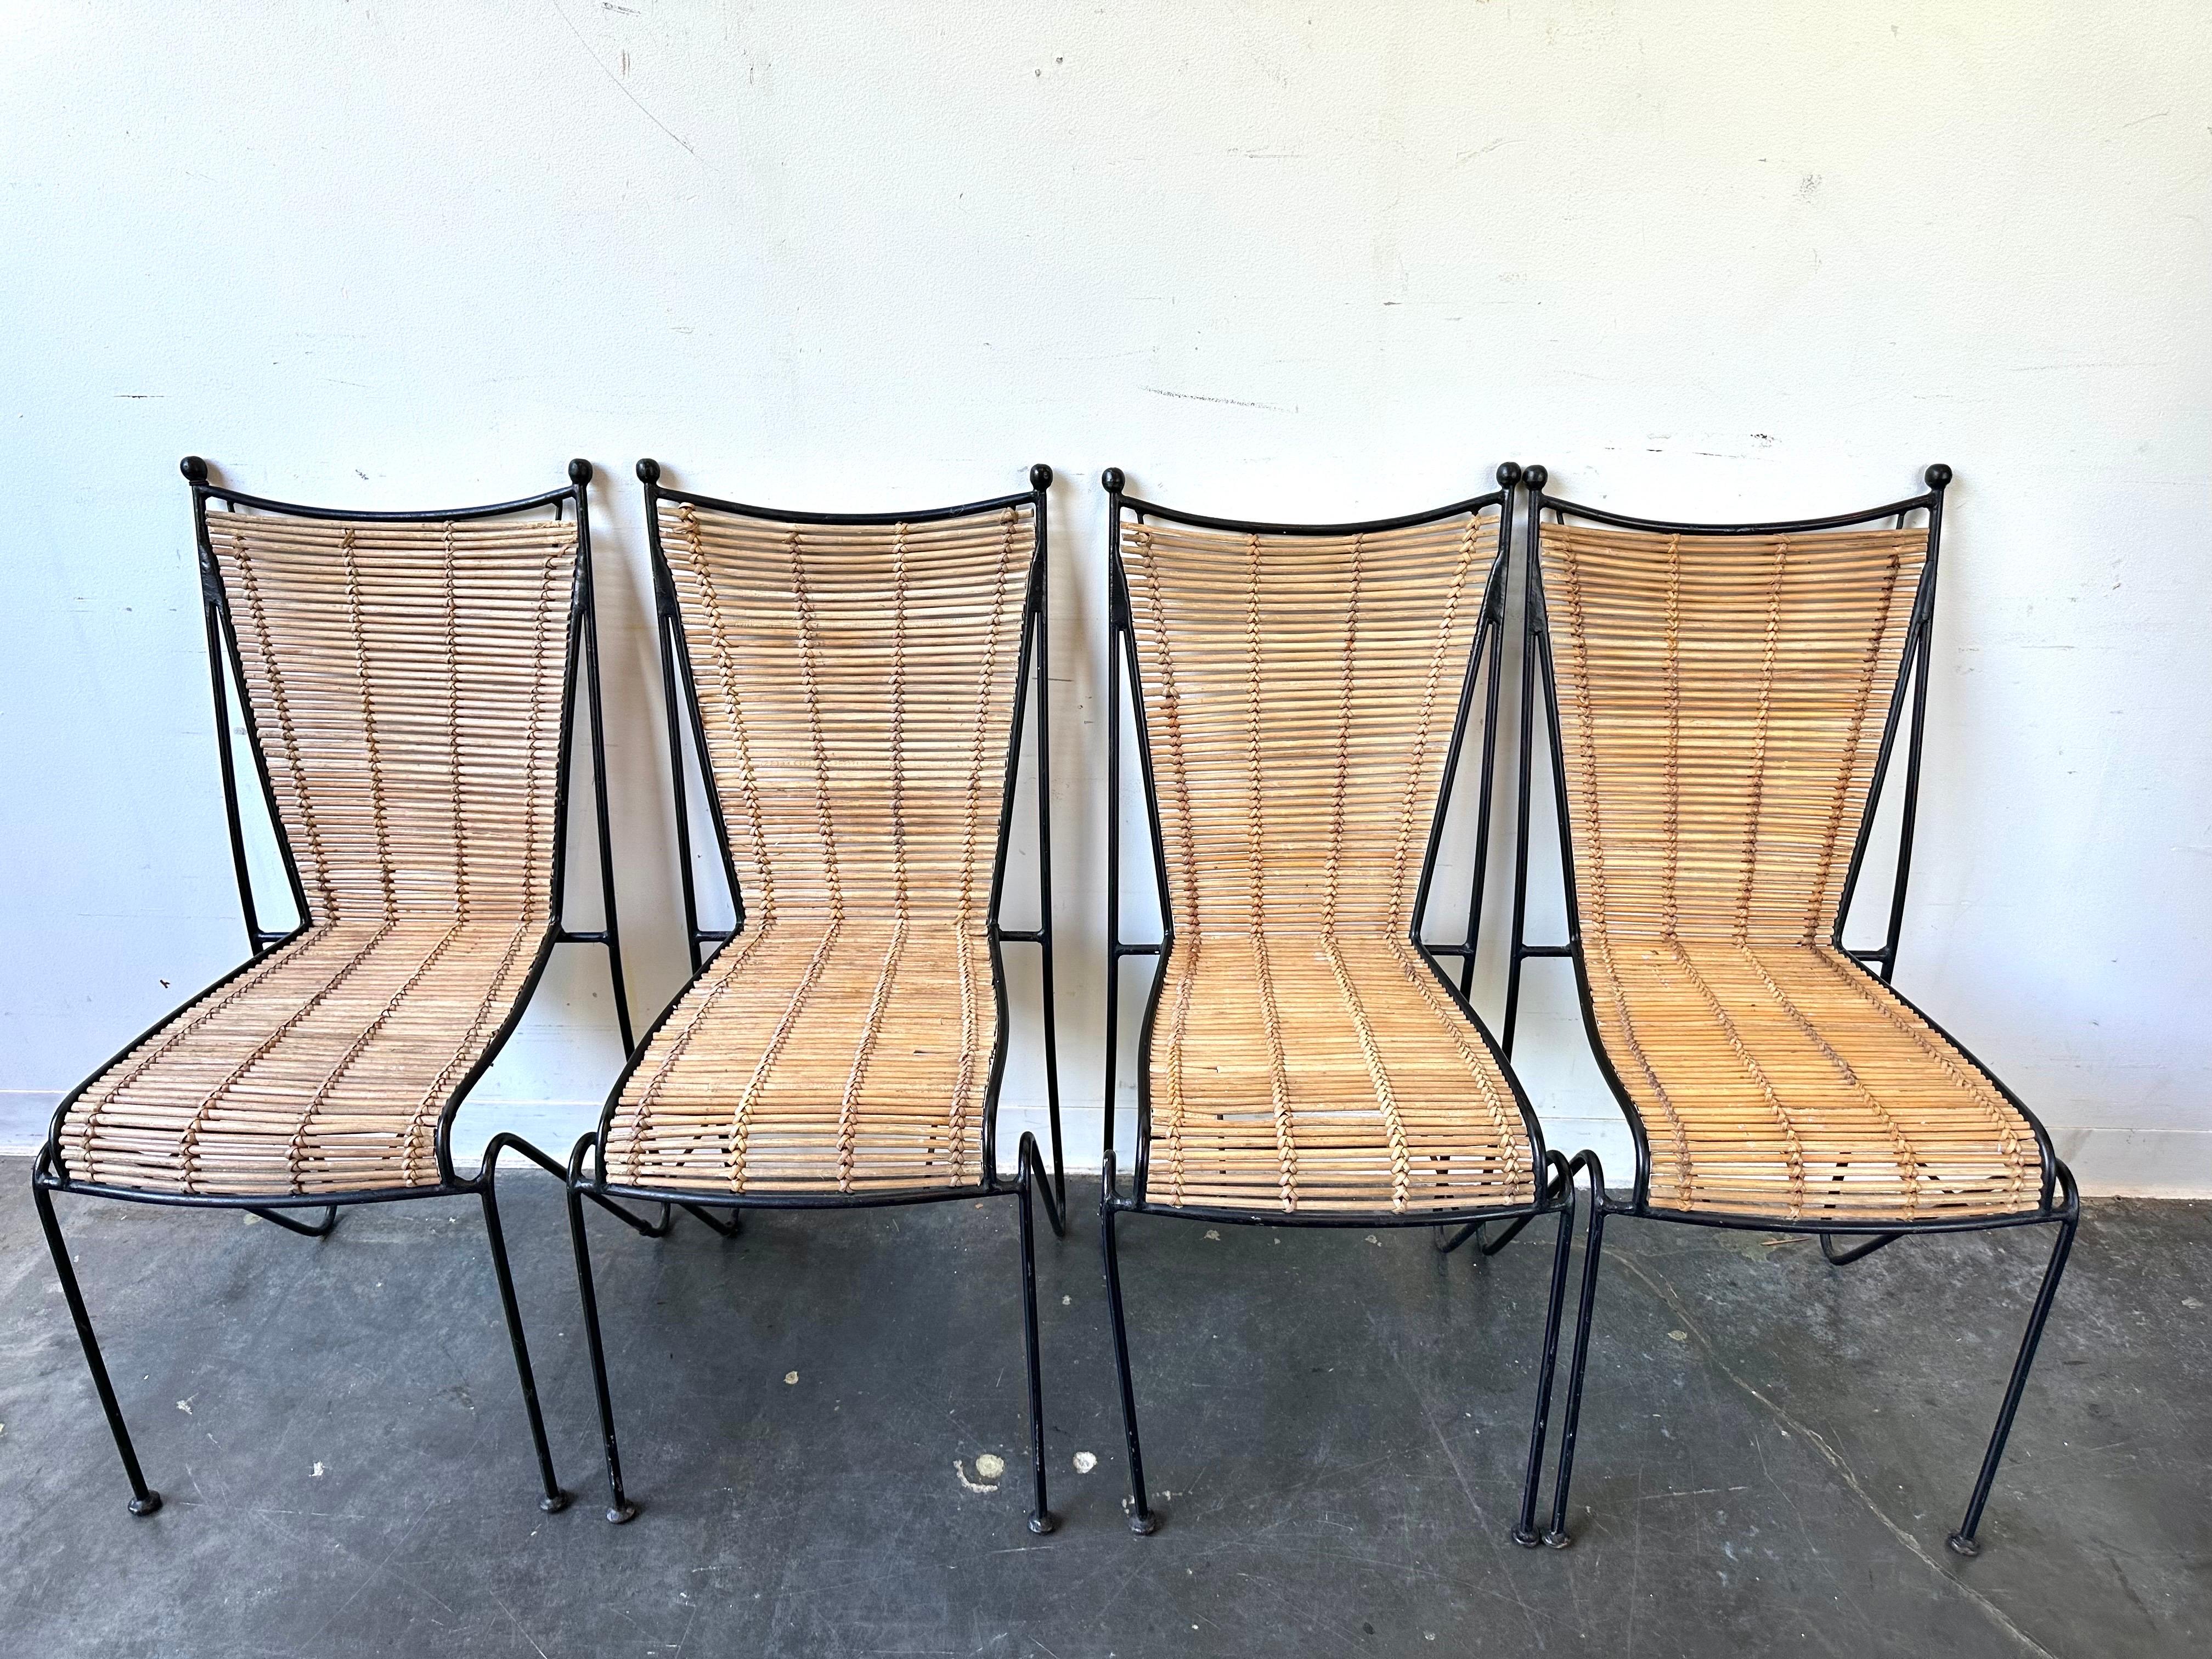 Set of 4 wrought iron and rattan side or dining chairs by Pipsan Saarinen Swanson for Ficks Reed, circa 1960s. Gorgeous silhouette. Excellent design and exquisite craftsmanship. 